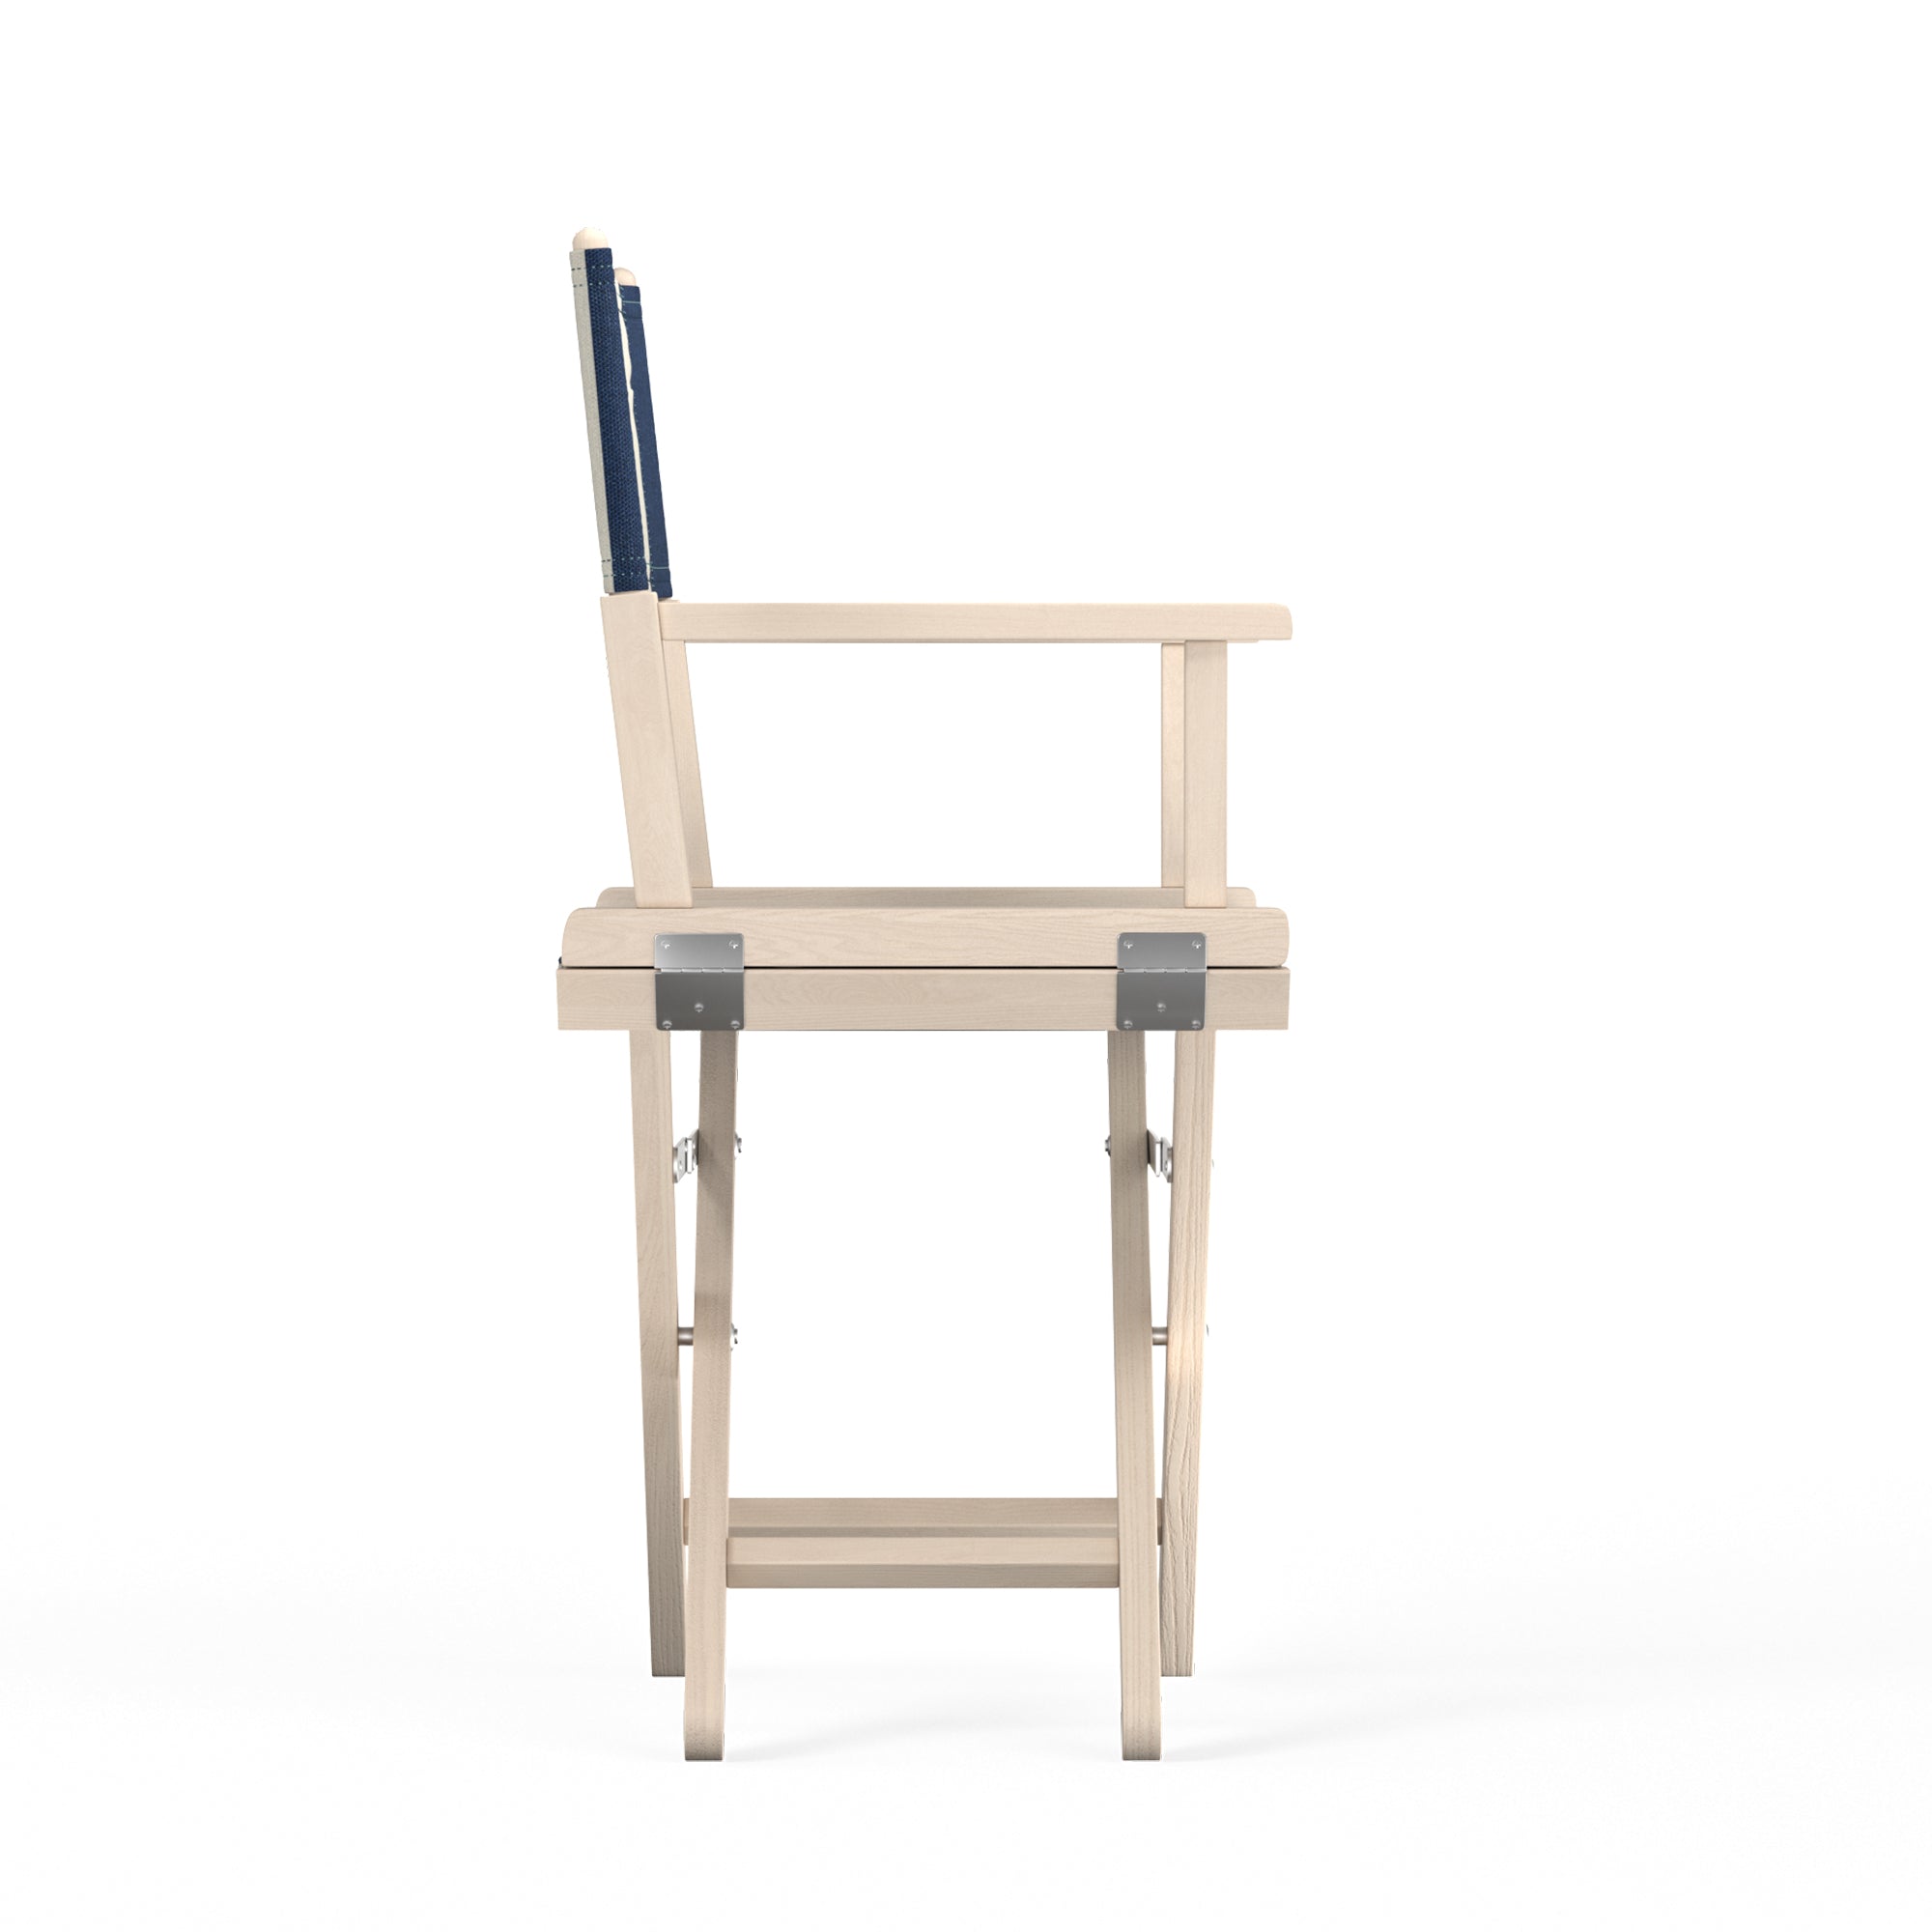 Director's%20Chair%20in%20Navy%20Bold%20Stripe%20&%20White%20Stained%20Beech image 3